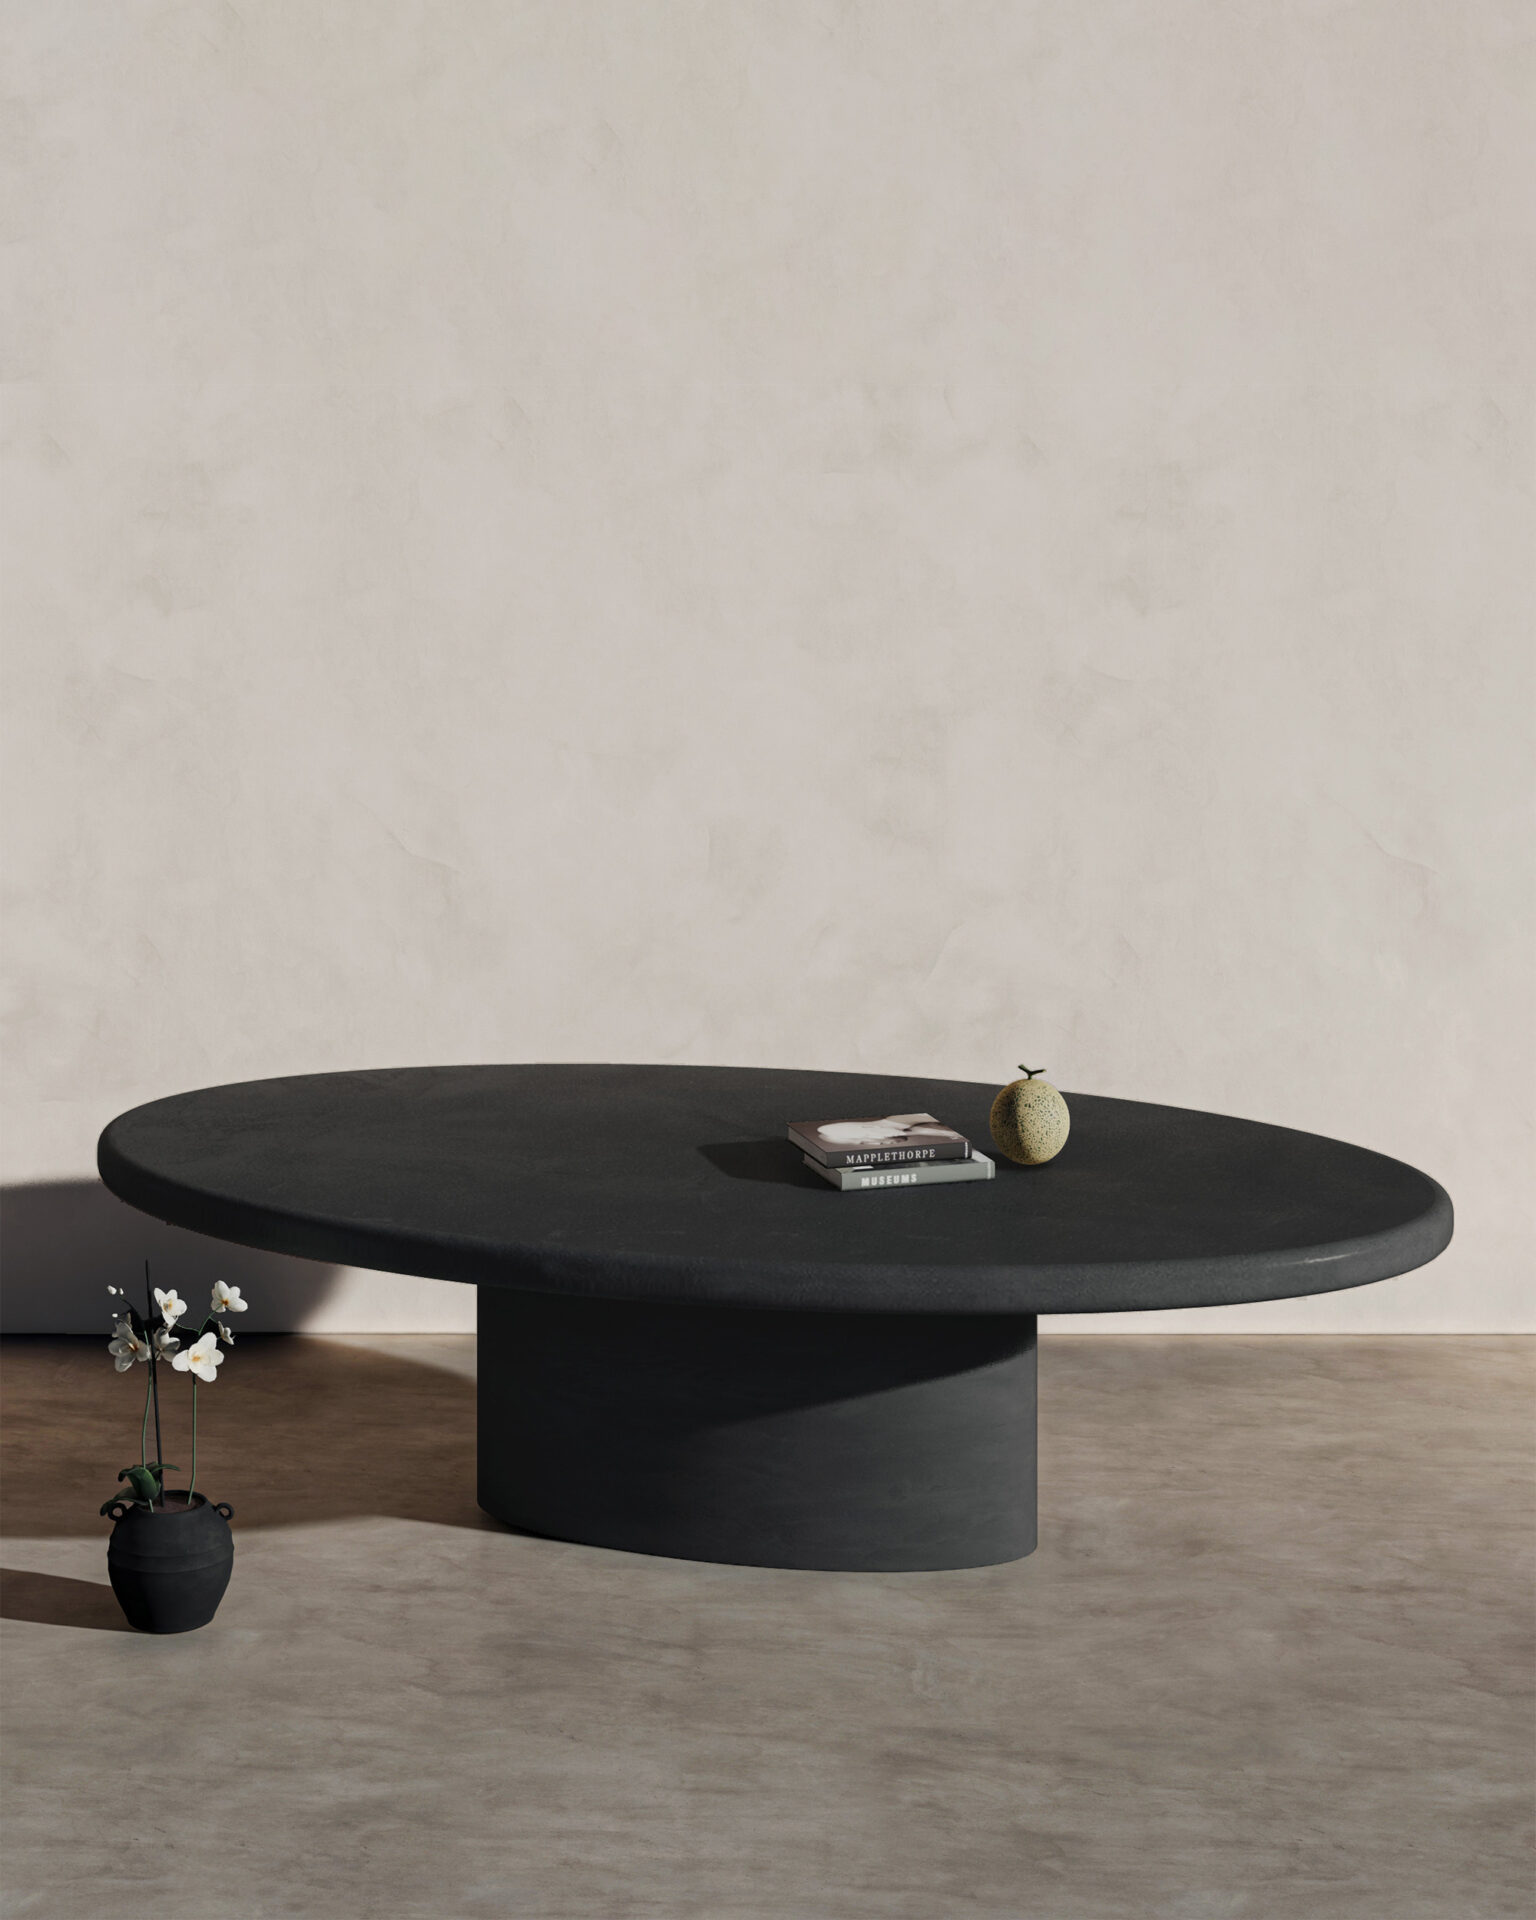 Studio Straf_Oval Dining Table with Plastered Leg_Case Goods_Studio Fenice_(1)